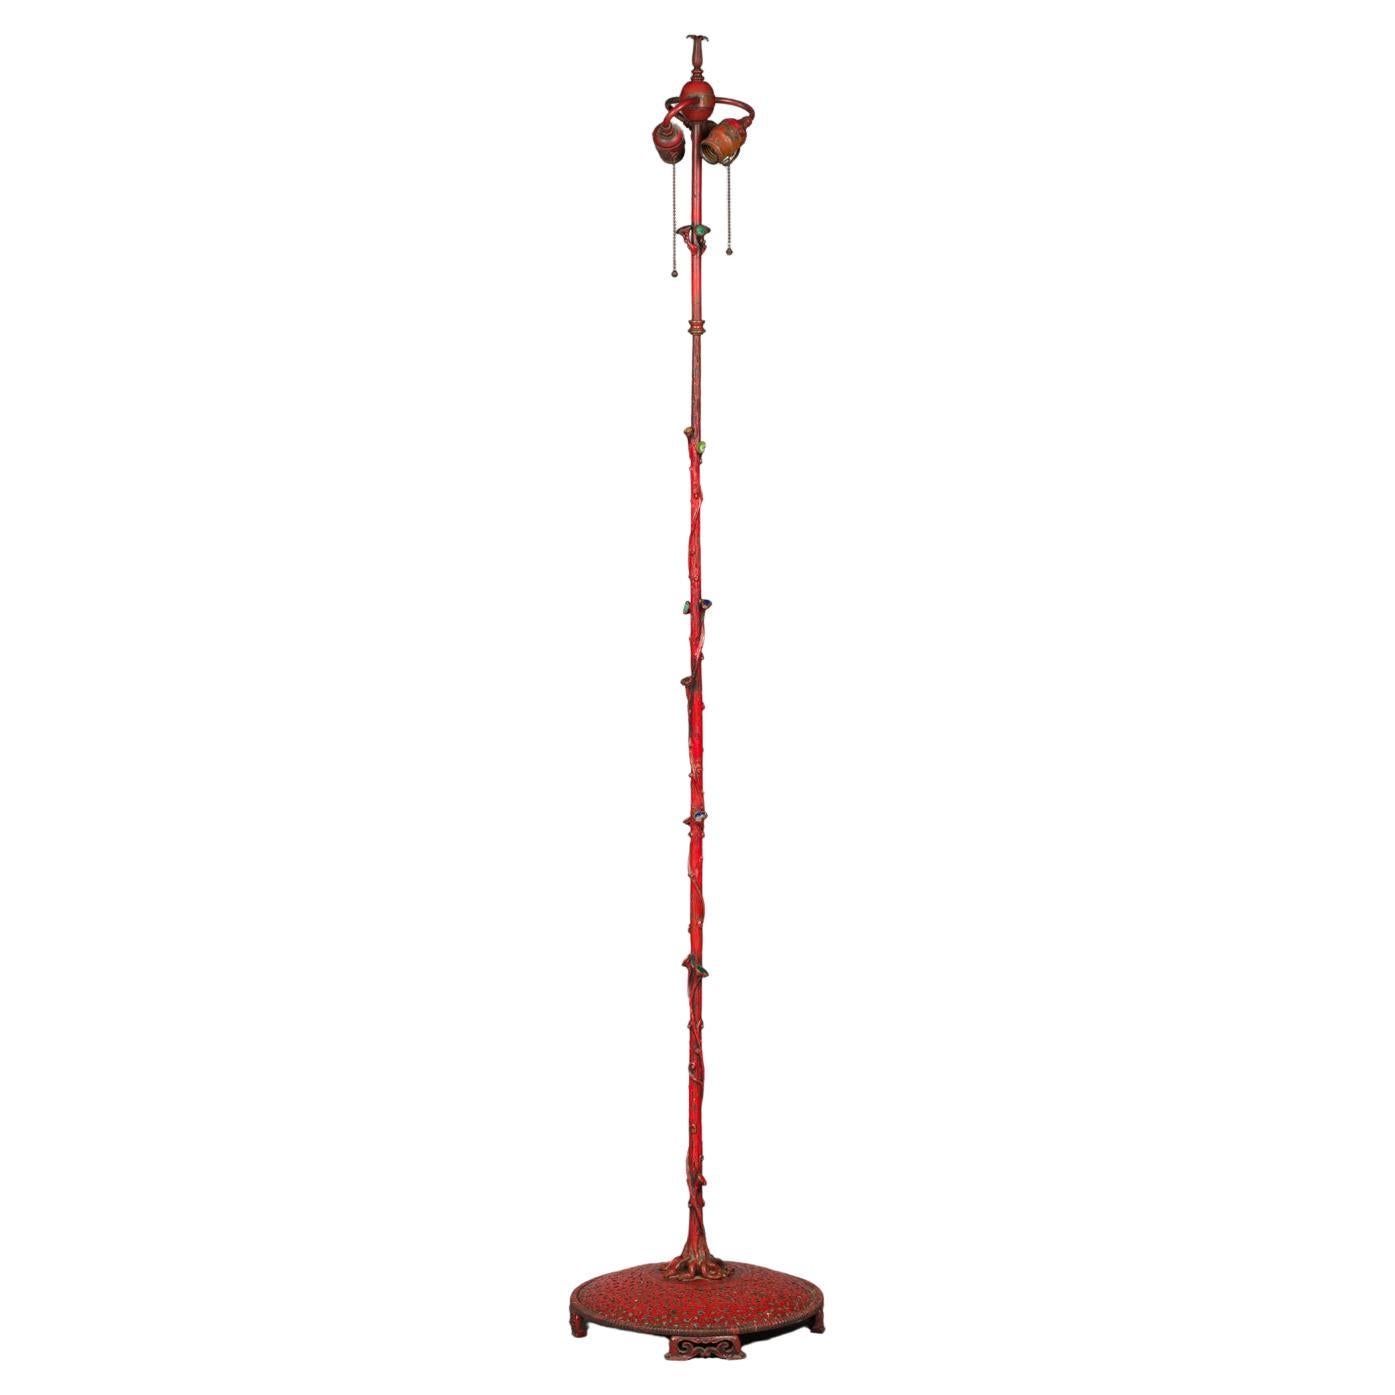 American Red Lacquered Bronze Floor Lamp, by E.F. Caldwell, circa 1910